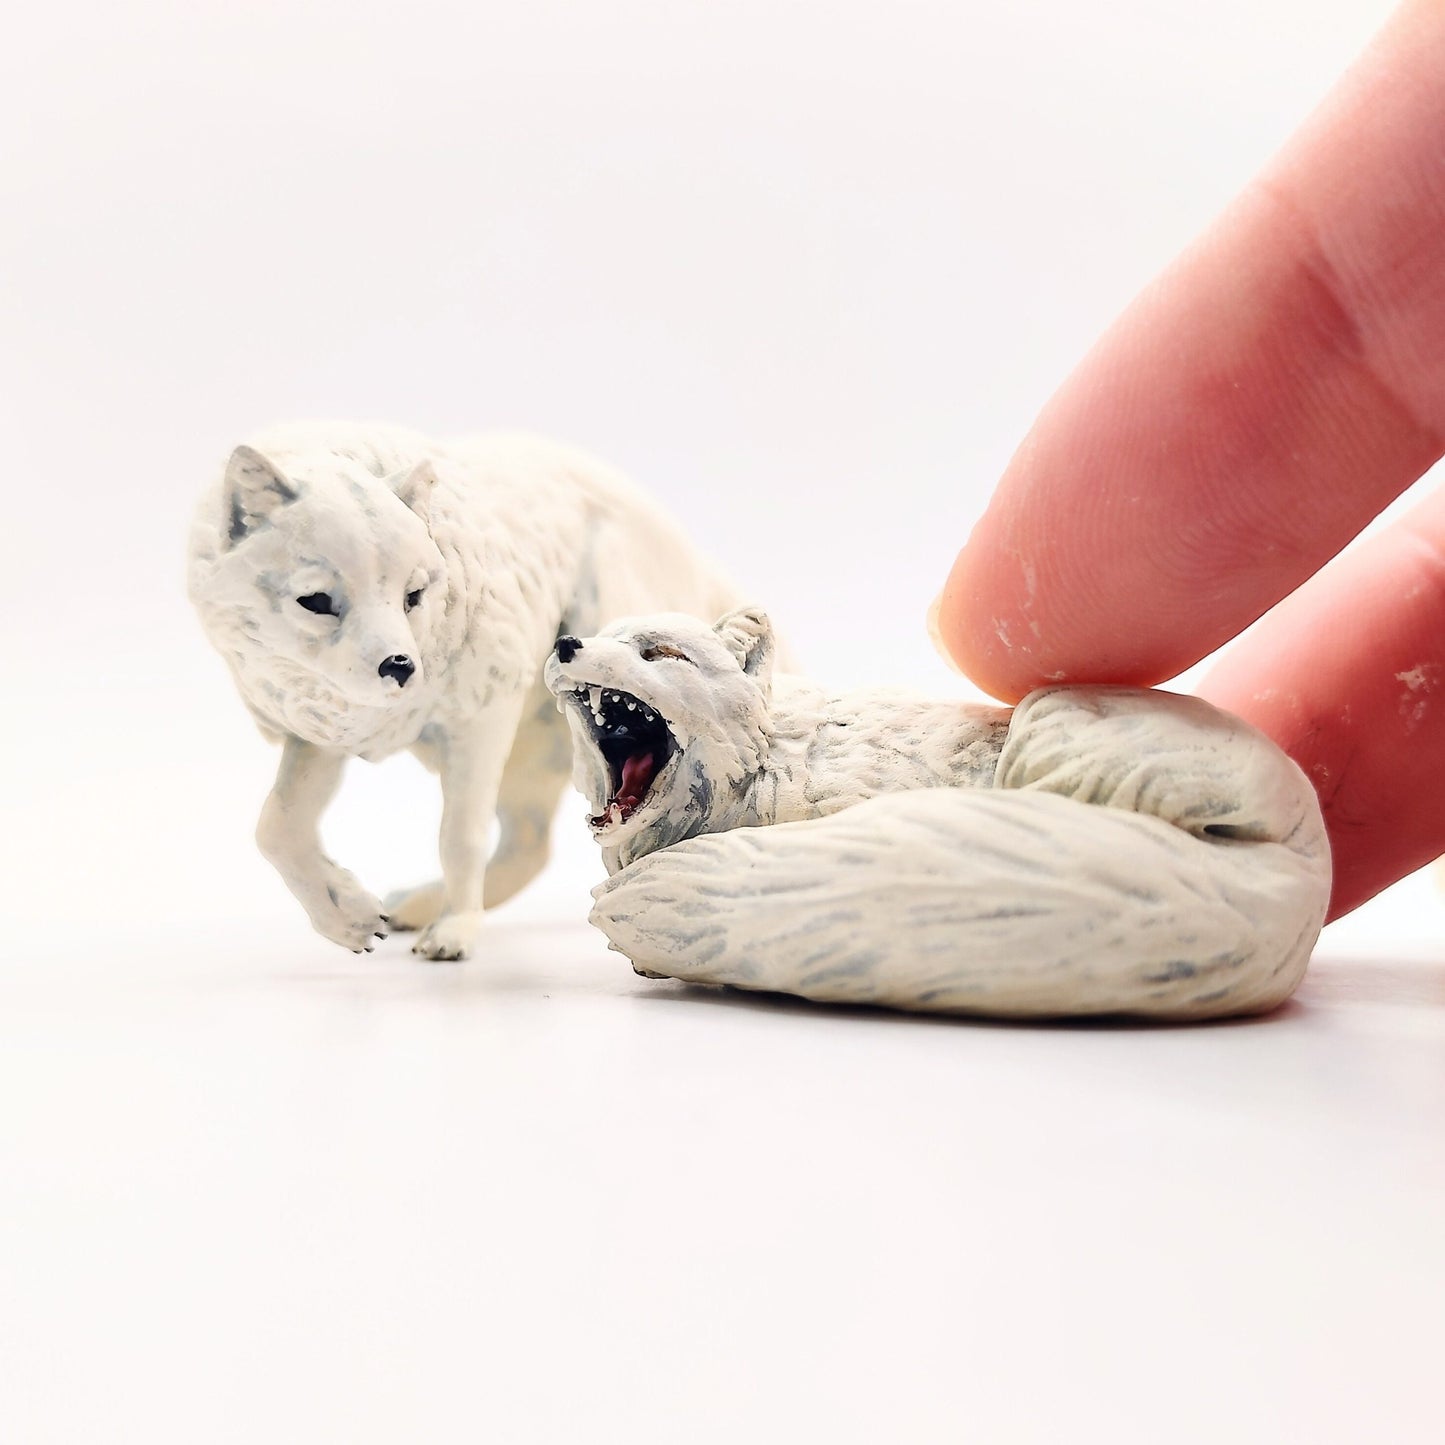 Animal Den Miniatures - Arctic Fox - 1:12 scale miniature animal sized for snow diorama, winter dollhouse, small hand painted scaled 3d printed tabletop mini